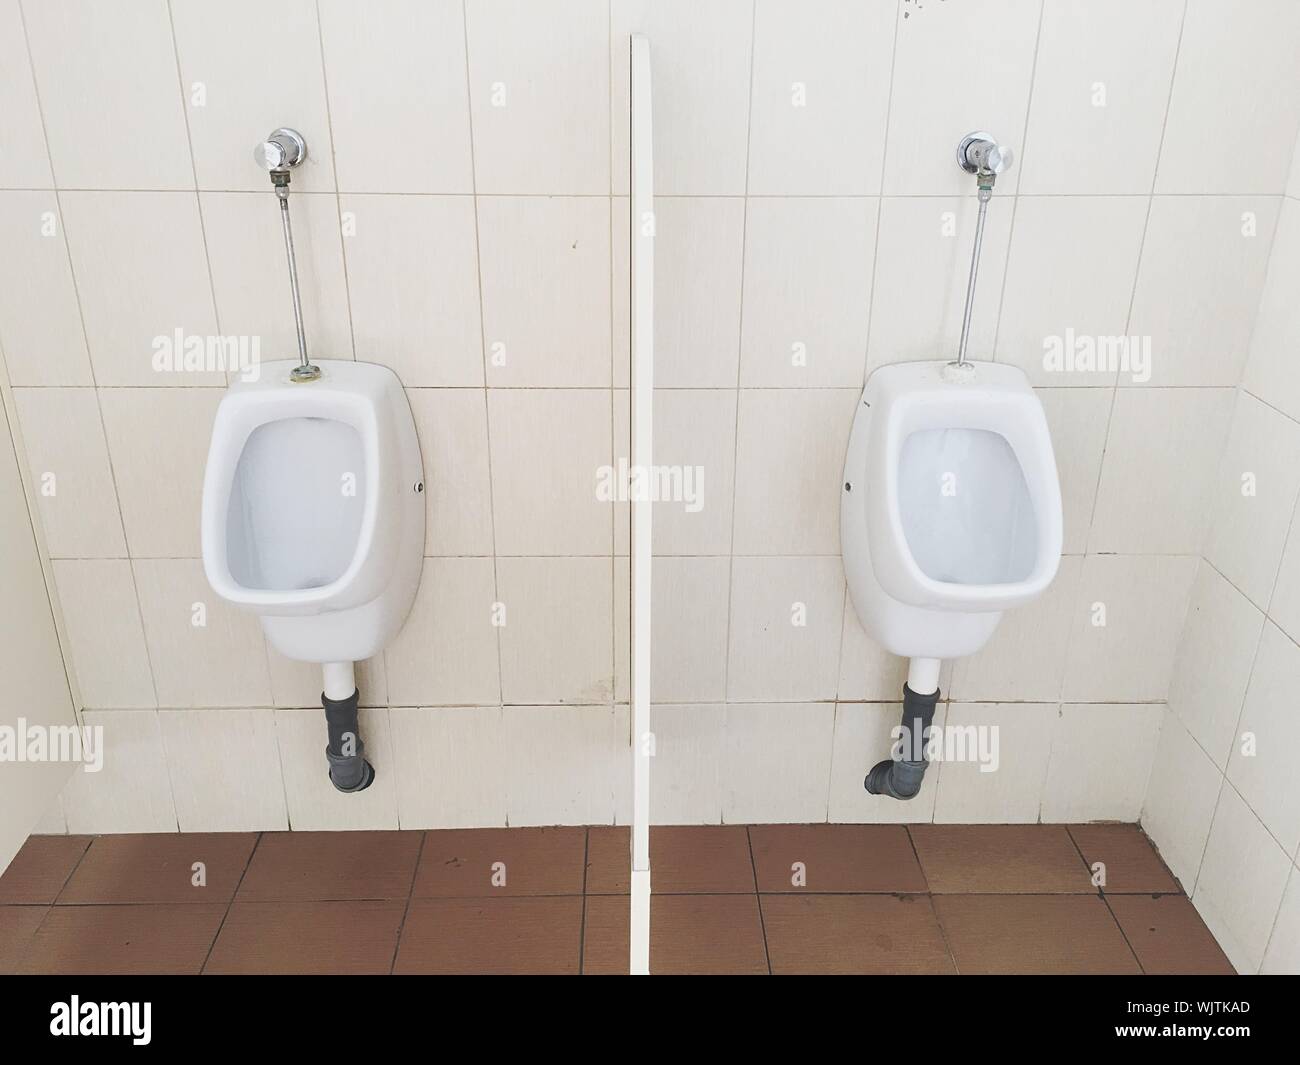 Flushing Toilets Against Tile Wall In Bathroom Stock Photo